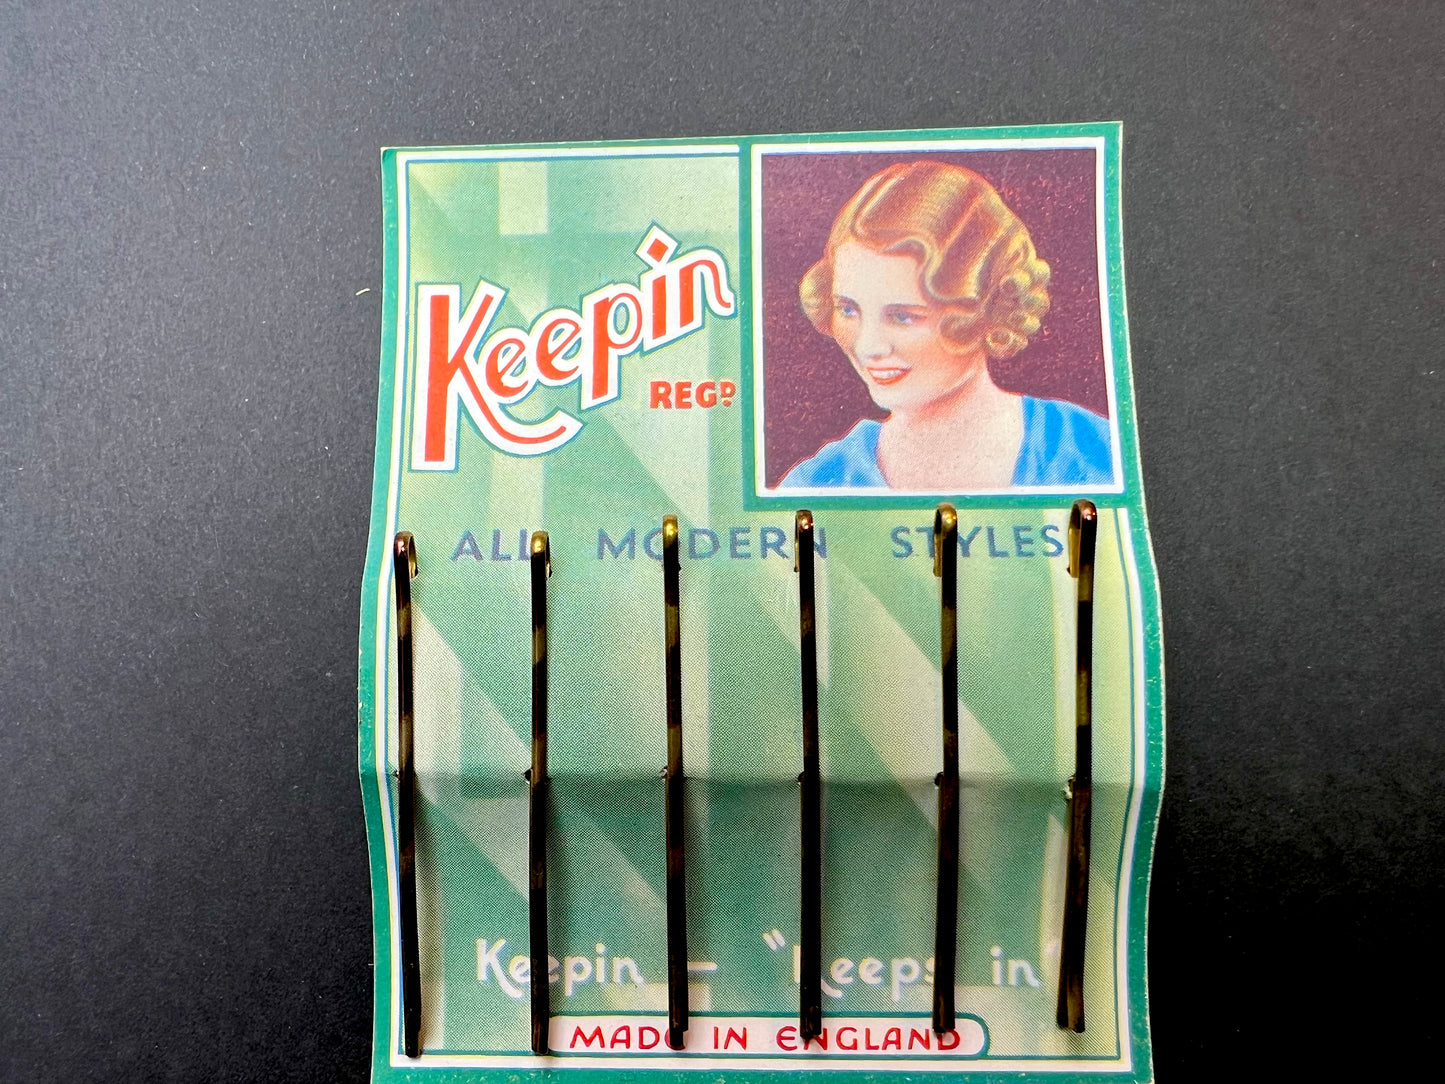 "Keepin" 1930s HAIR GRIPS..for "ALL MODERN STYLES" 5cm grips